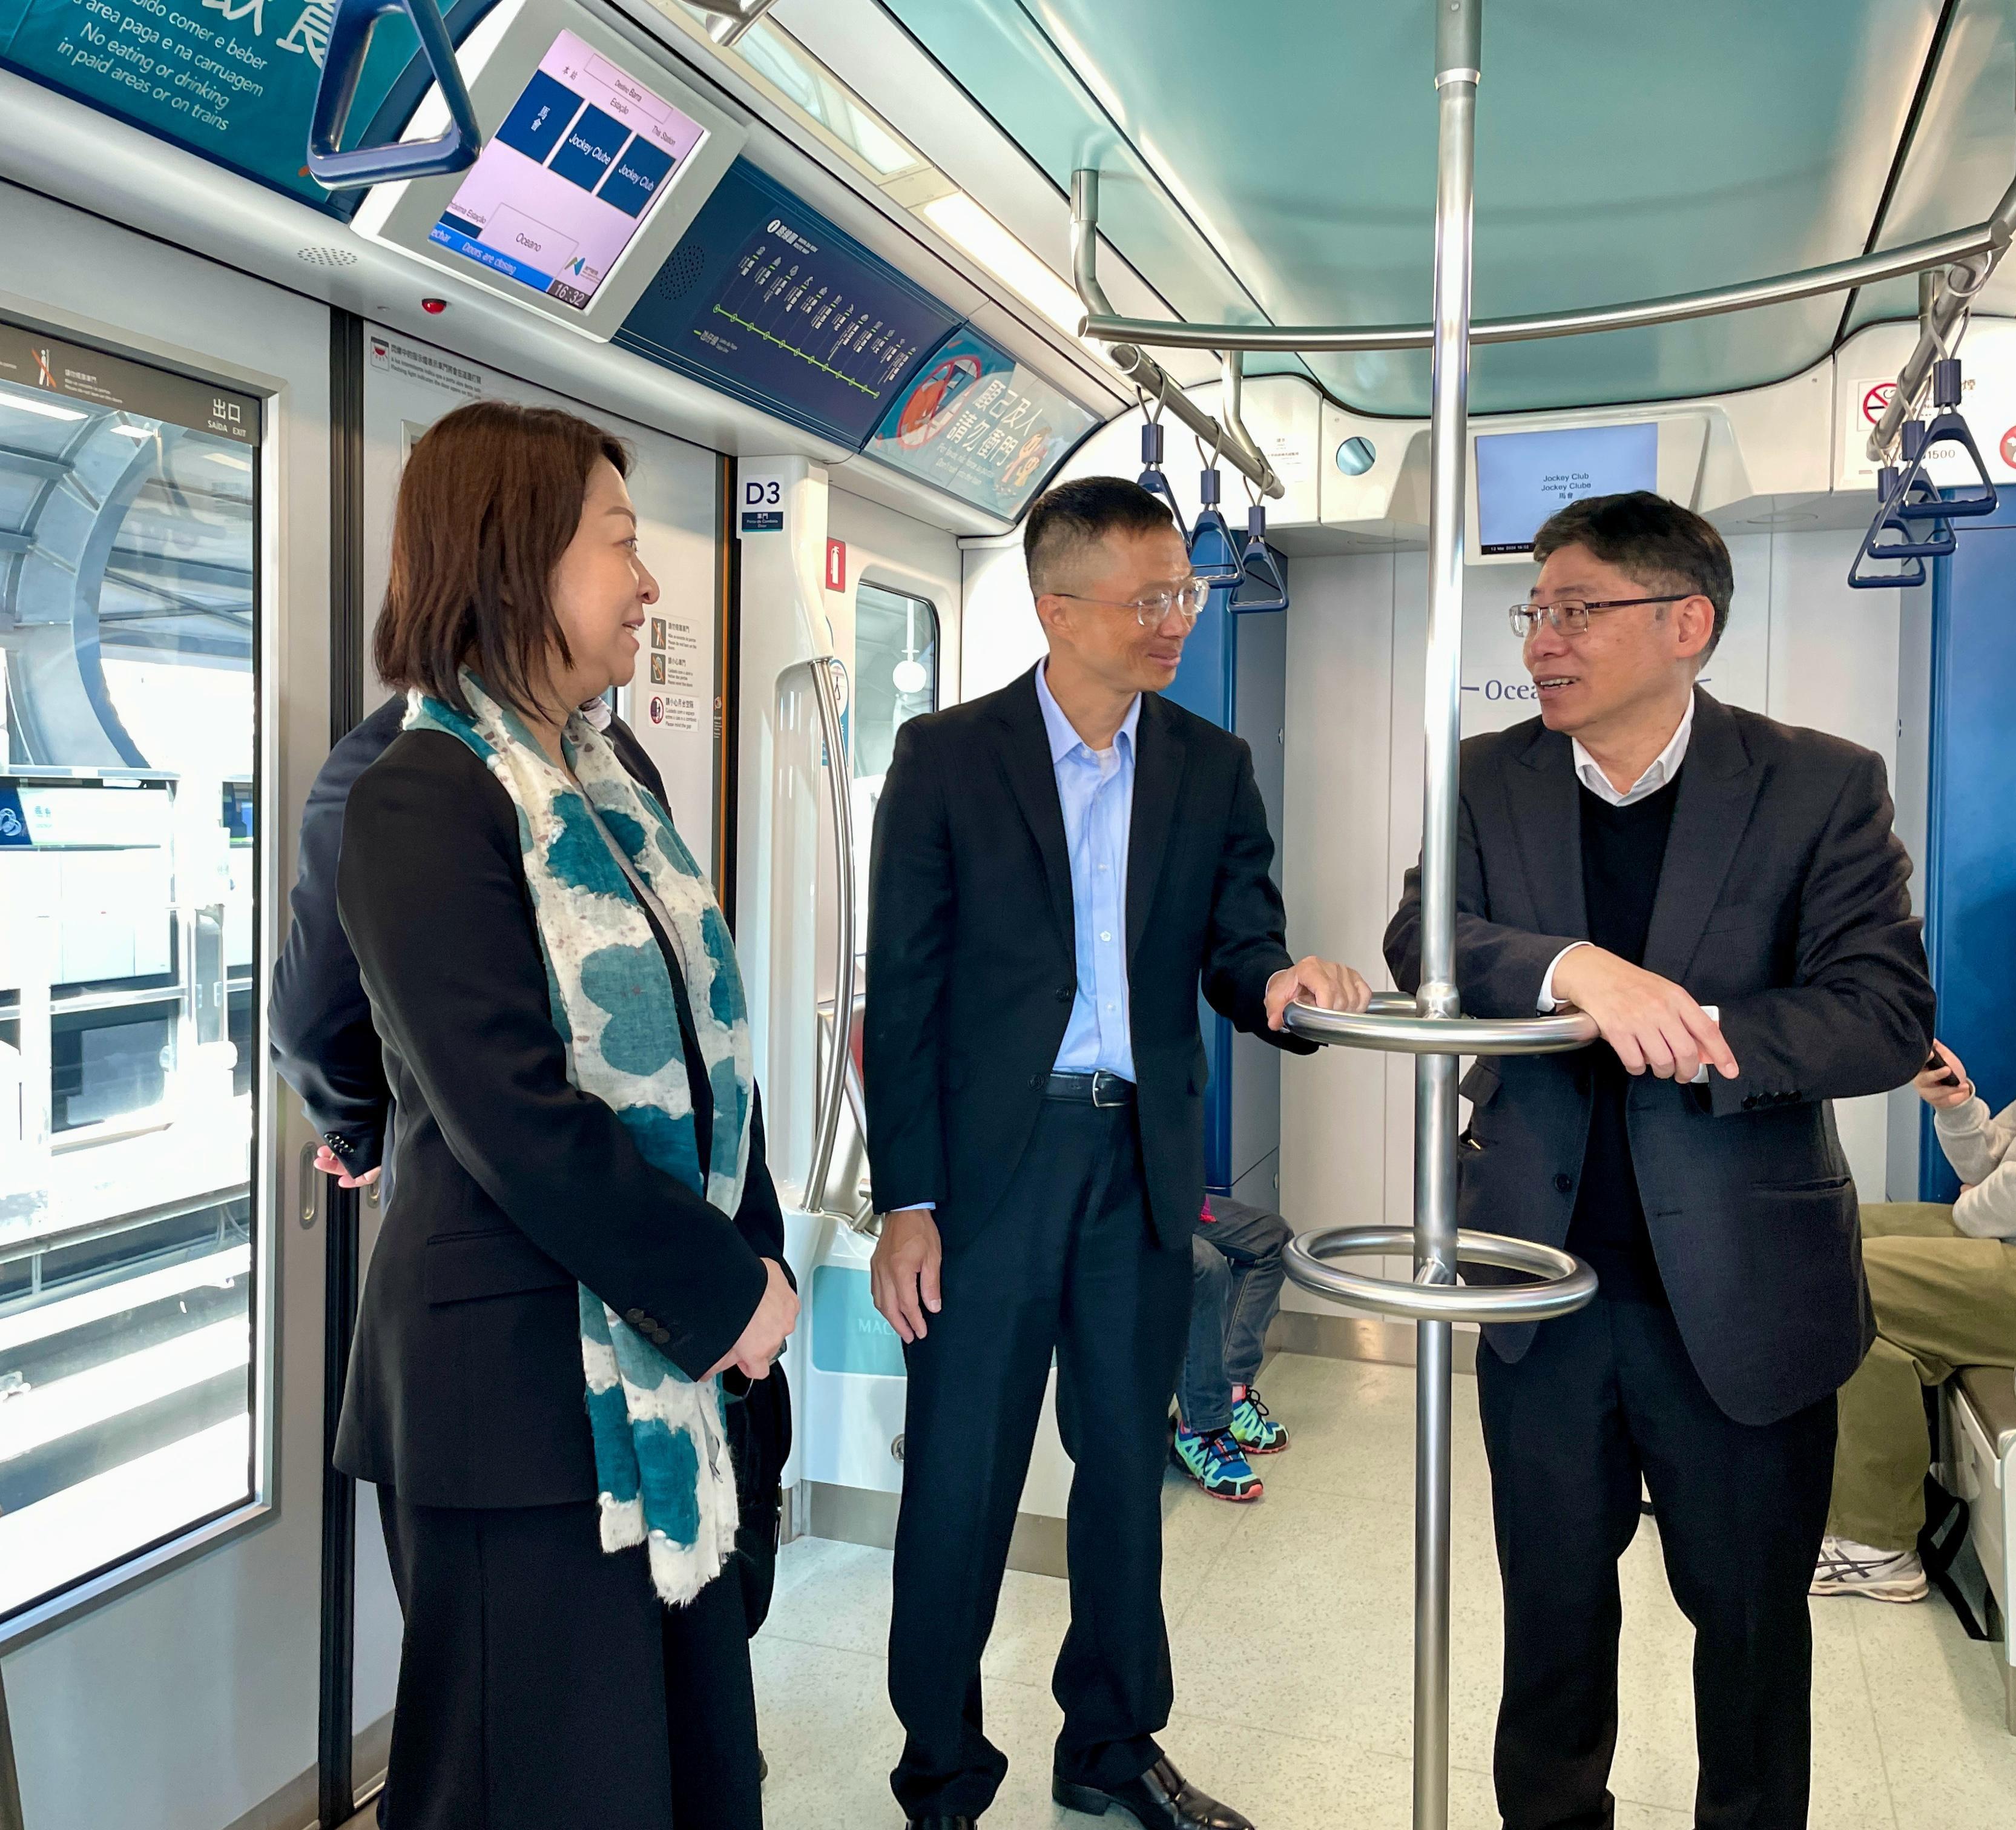 The Secretary for Transport and Logistics, Mr Lam Sai-hung, visited Zhuhai and Macao today (March 12). Photo shows Mr Lam (right), accompanied by the Director of the Macao Transport Bureau, Mr Lam Hin-san (centre), inspecting the Macao Light Rapid Transit. Also present is the Commissioner for Transport, Ms Angela Lee (left).